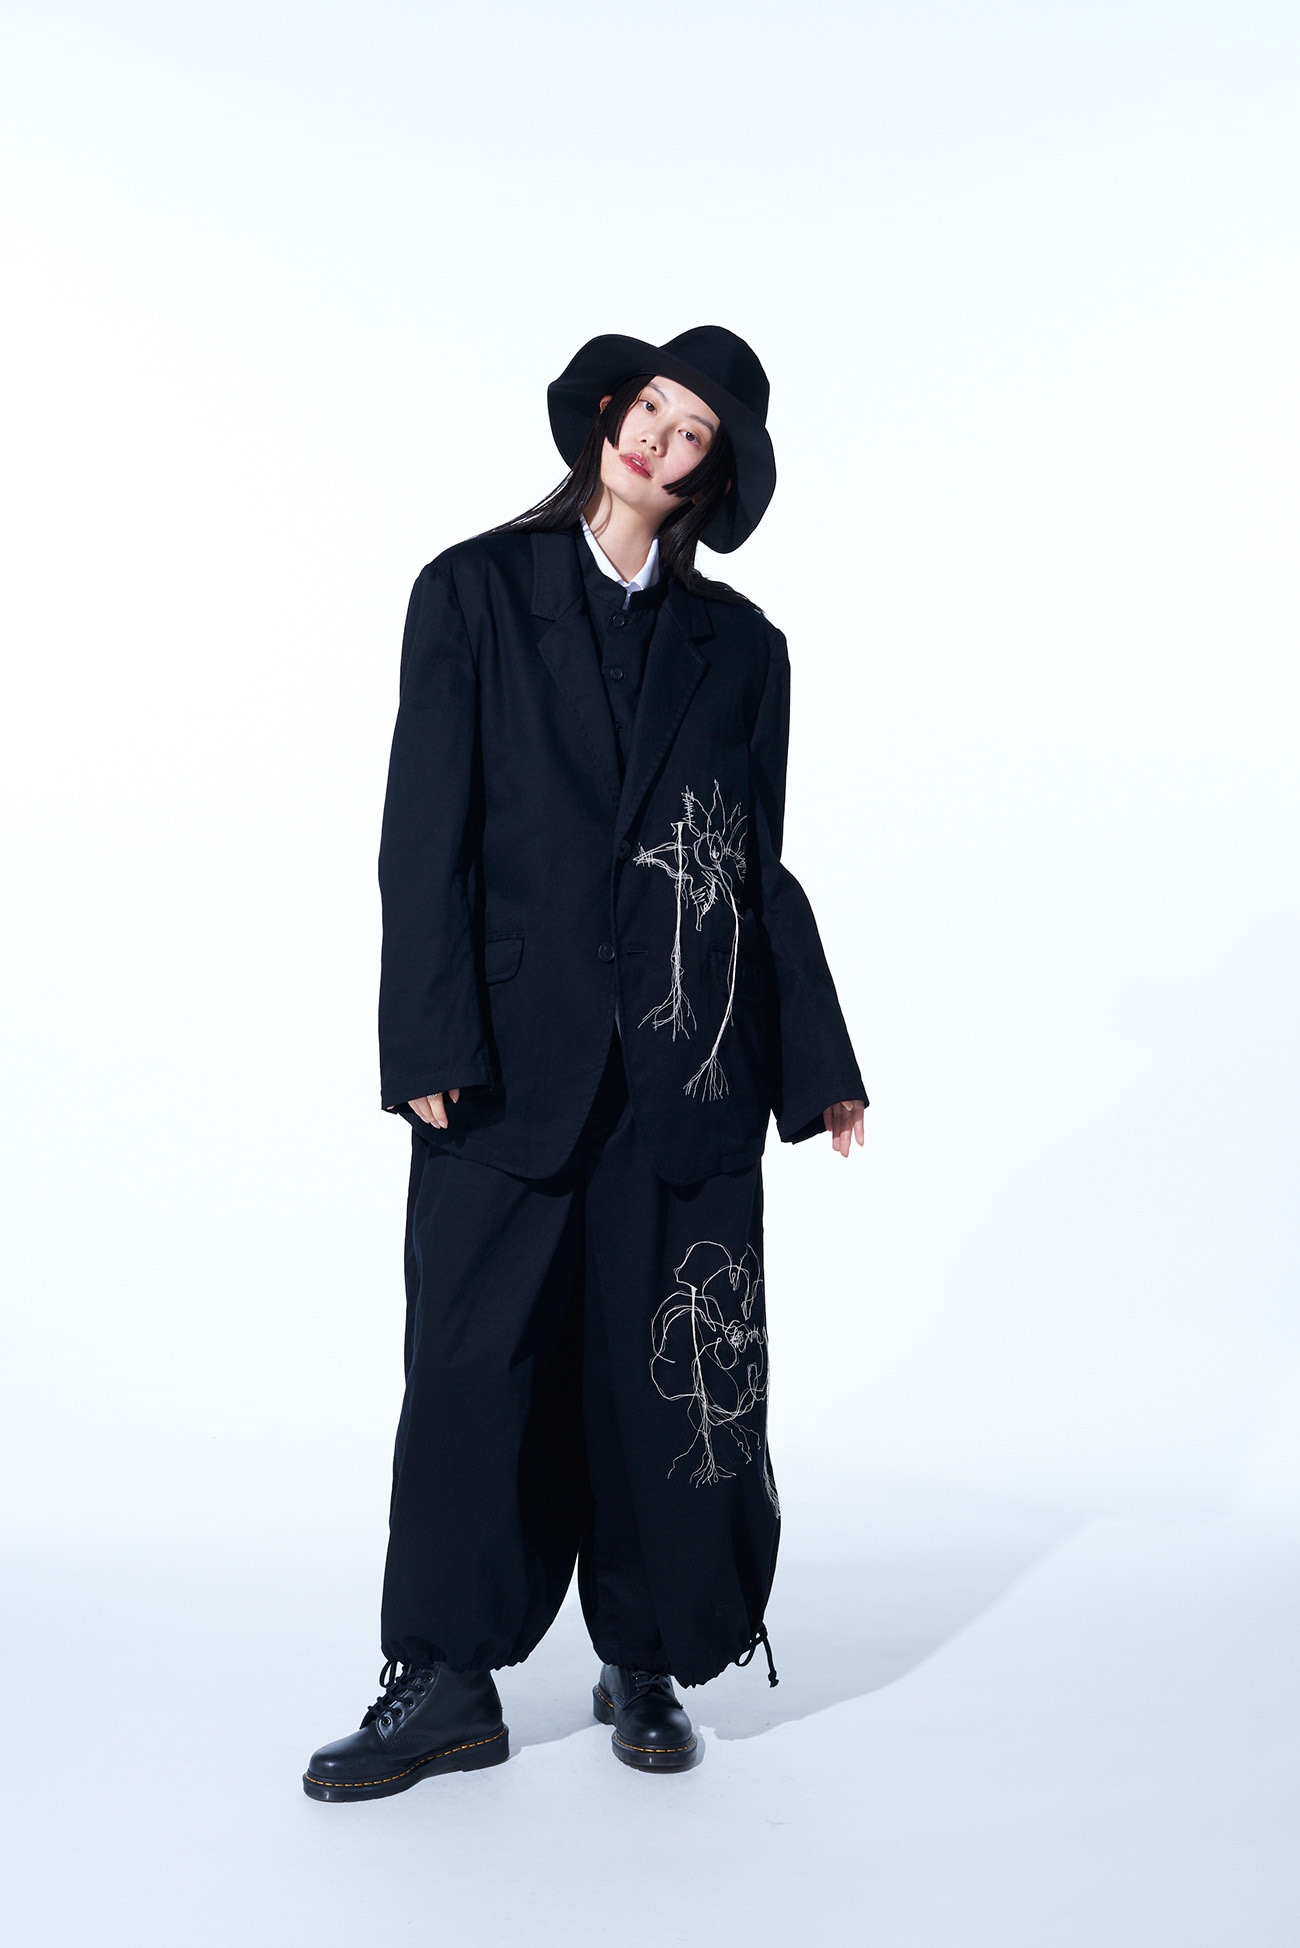 COTTON TWILL “QUEEN OF THE NIGHT“ EMBROIDERY JACKET(M Black): S